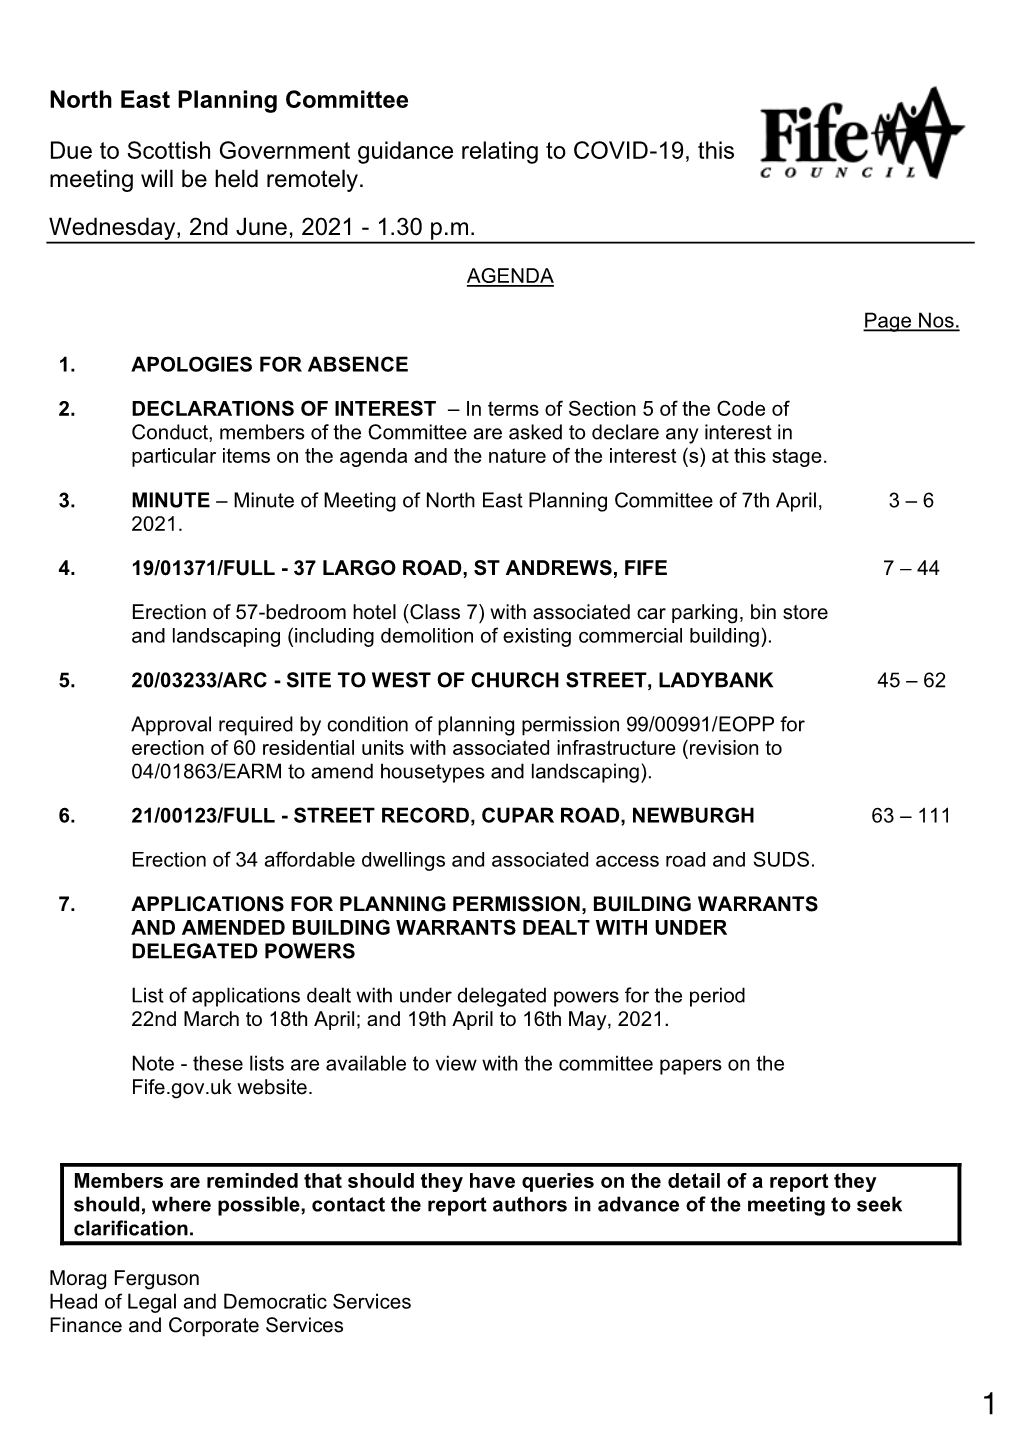 Agenda & Papers for Meeting of North East Planning Committee of 2 June